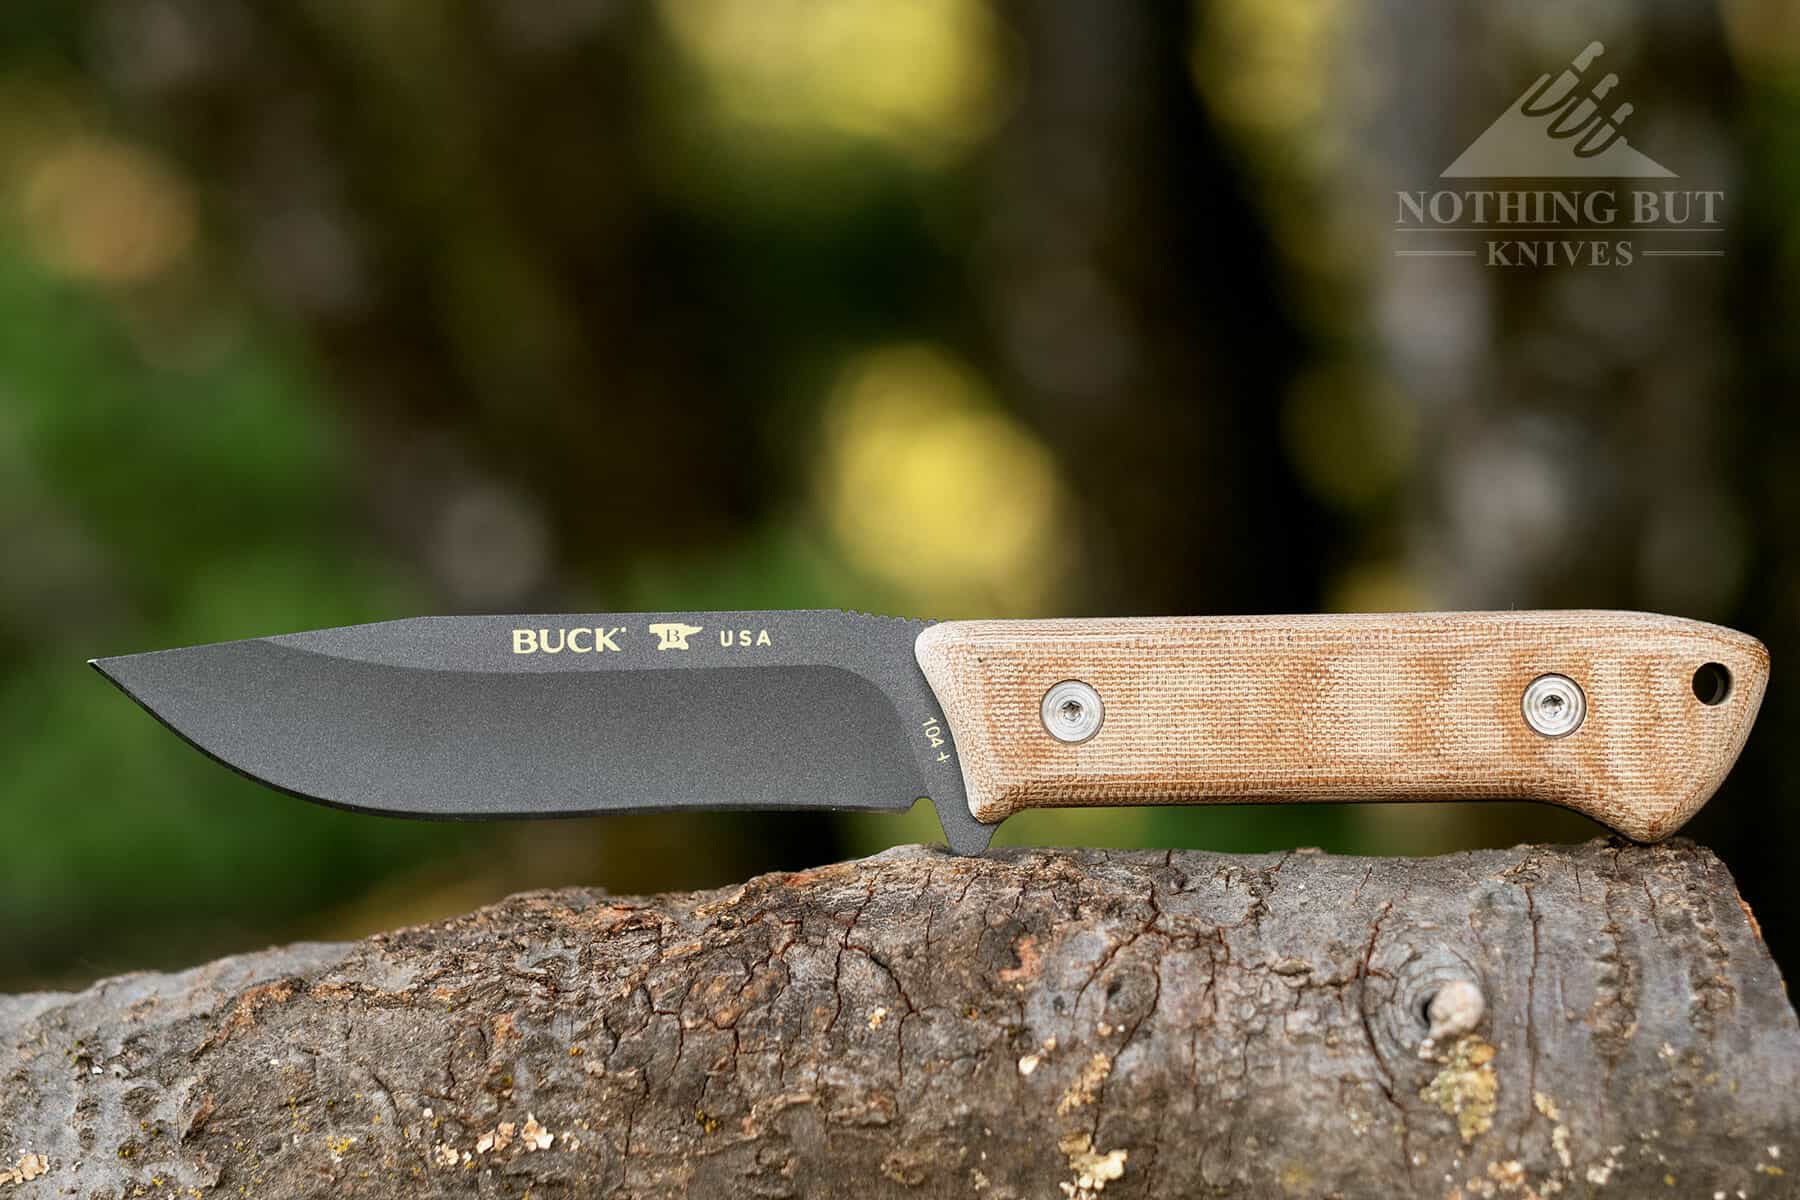 The Best Knives With Micarta Handle Scales